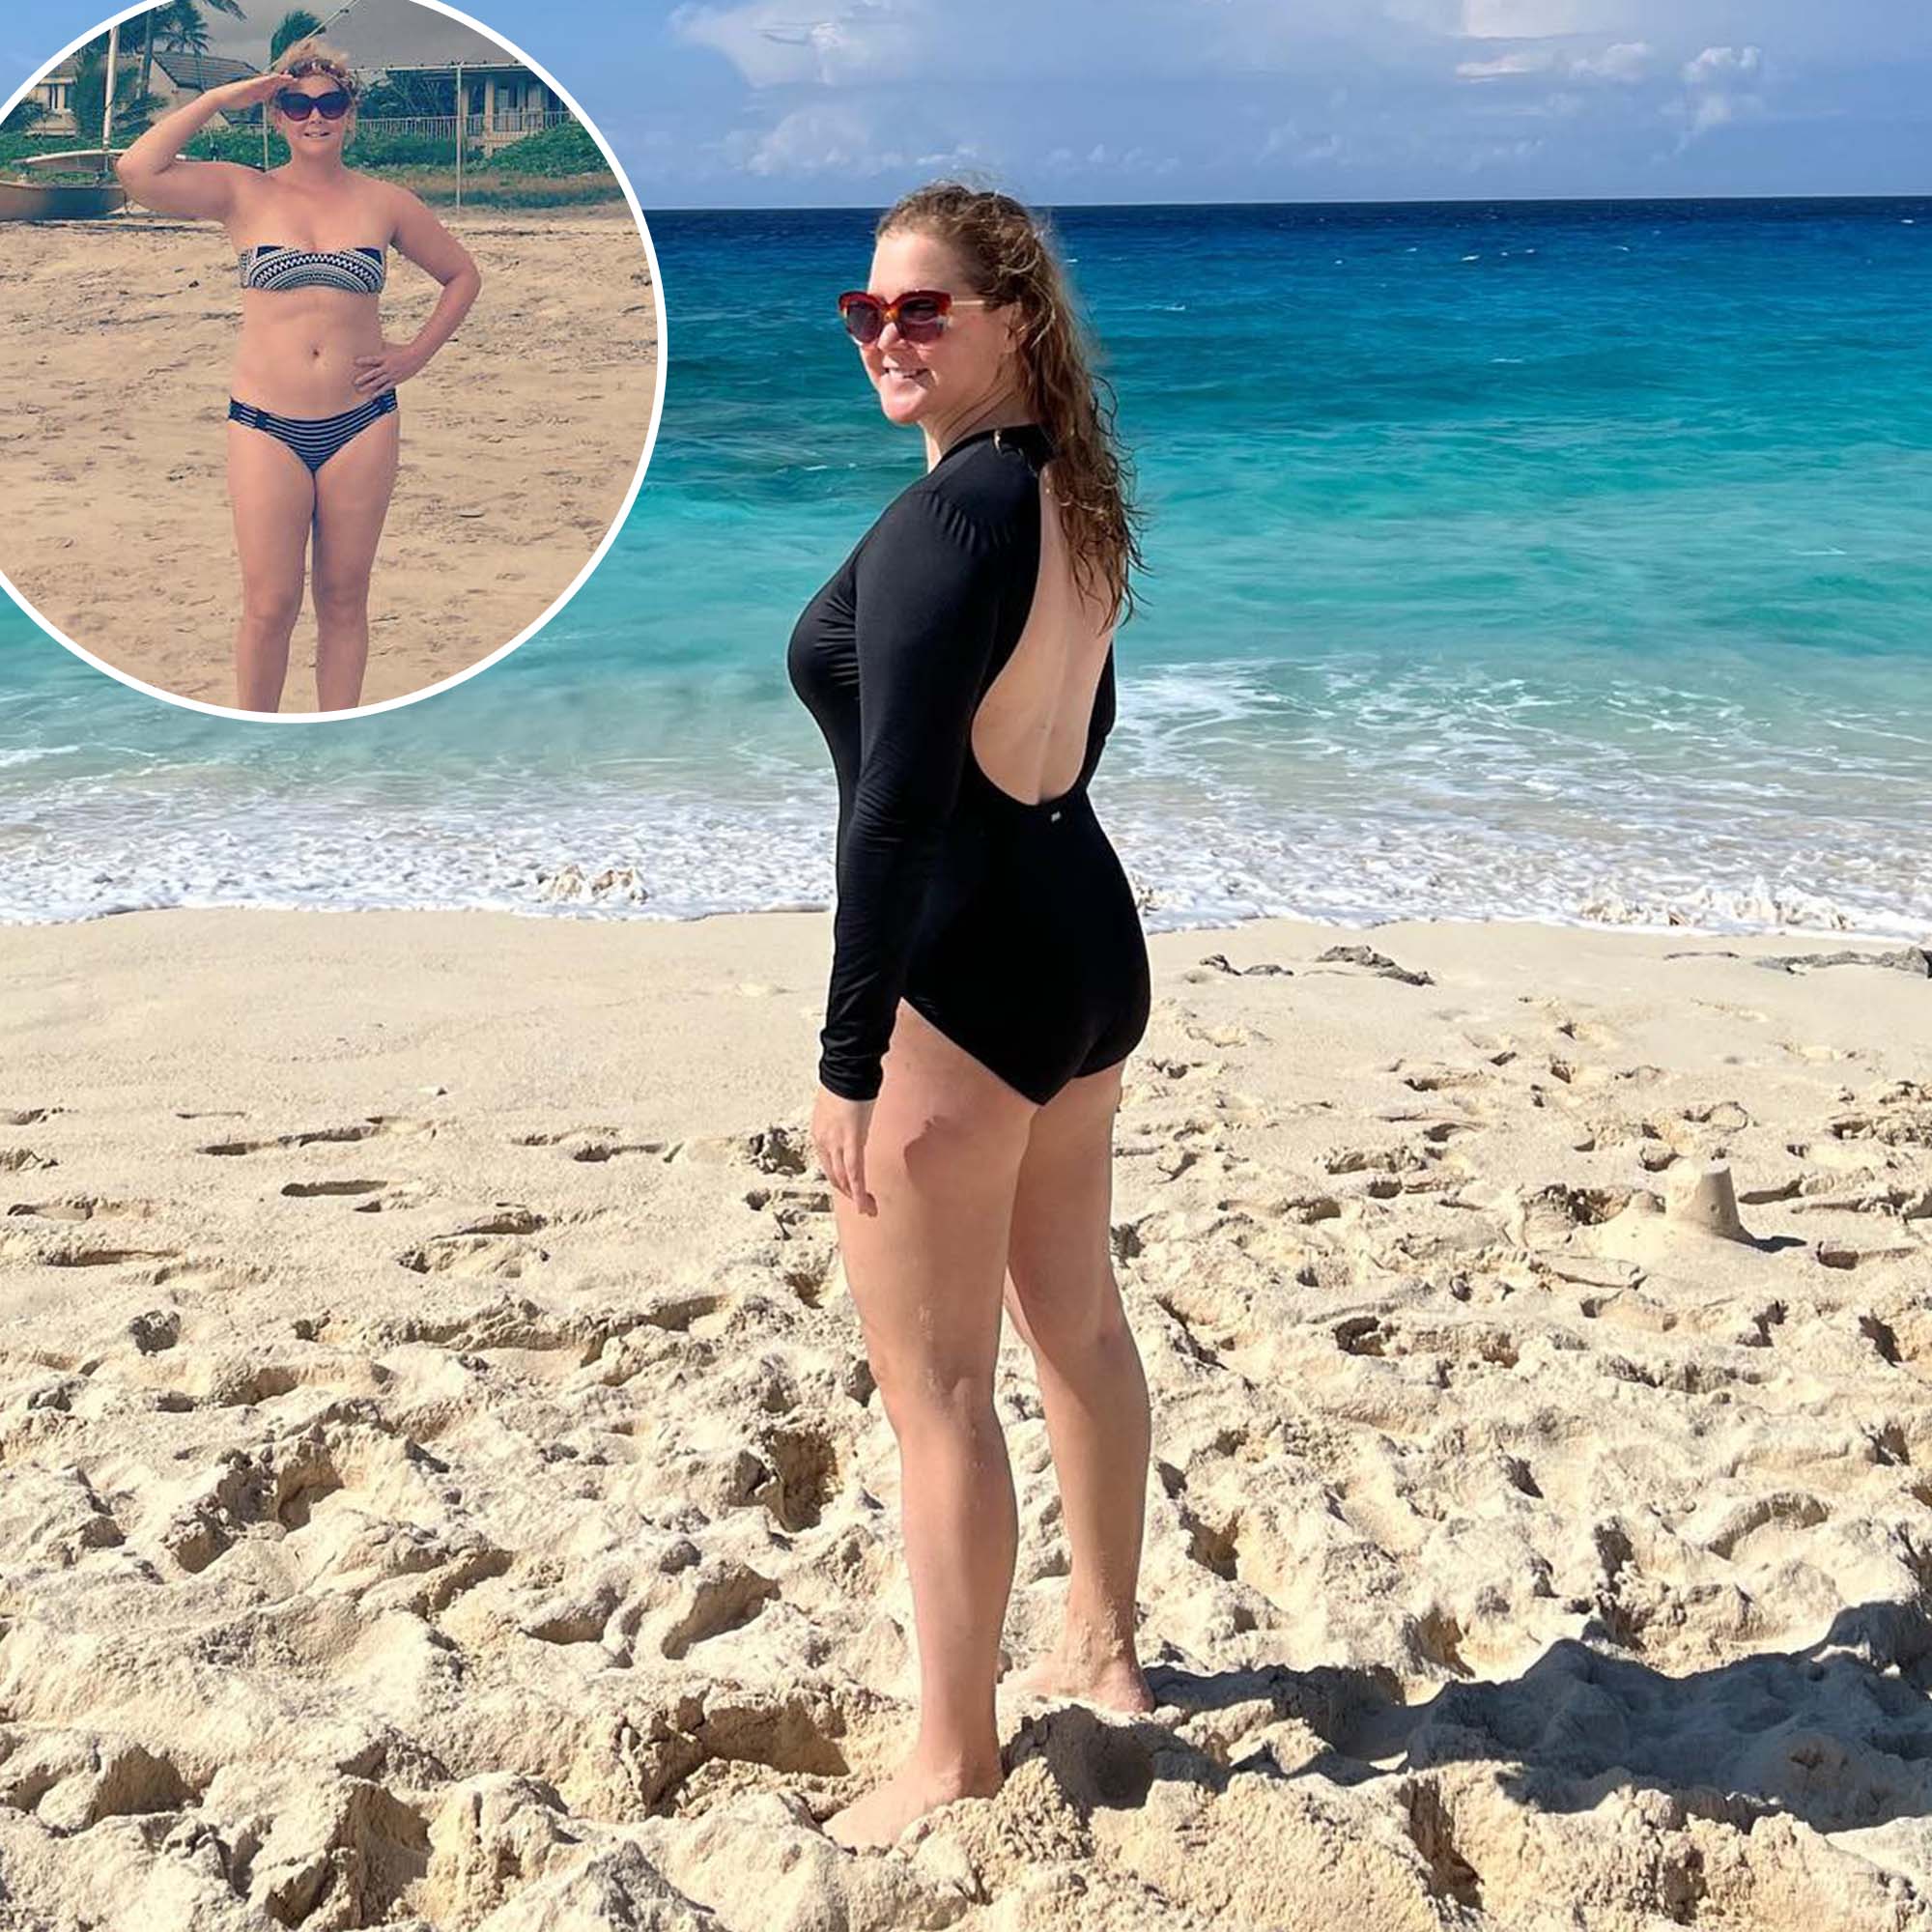 Fat People Nude On Beach - Amy Schumer's Swimsuit Photos: See Bikinis, One-Pieces